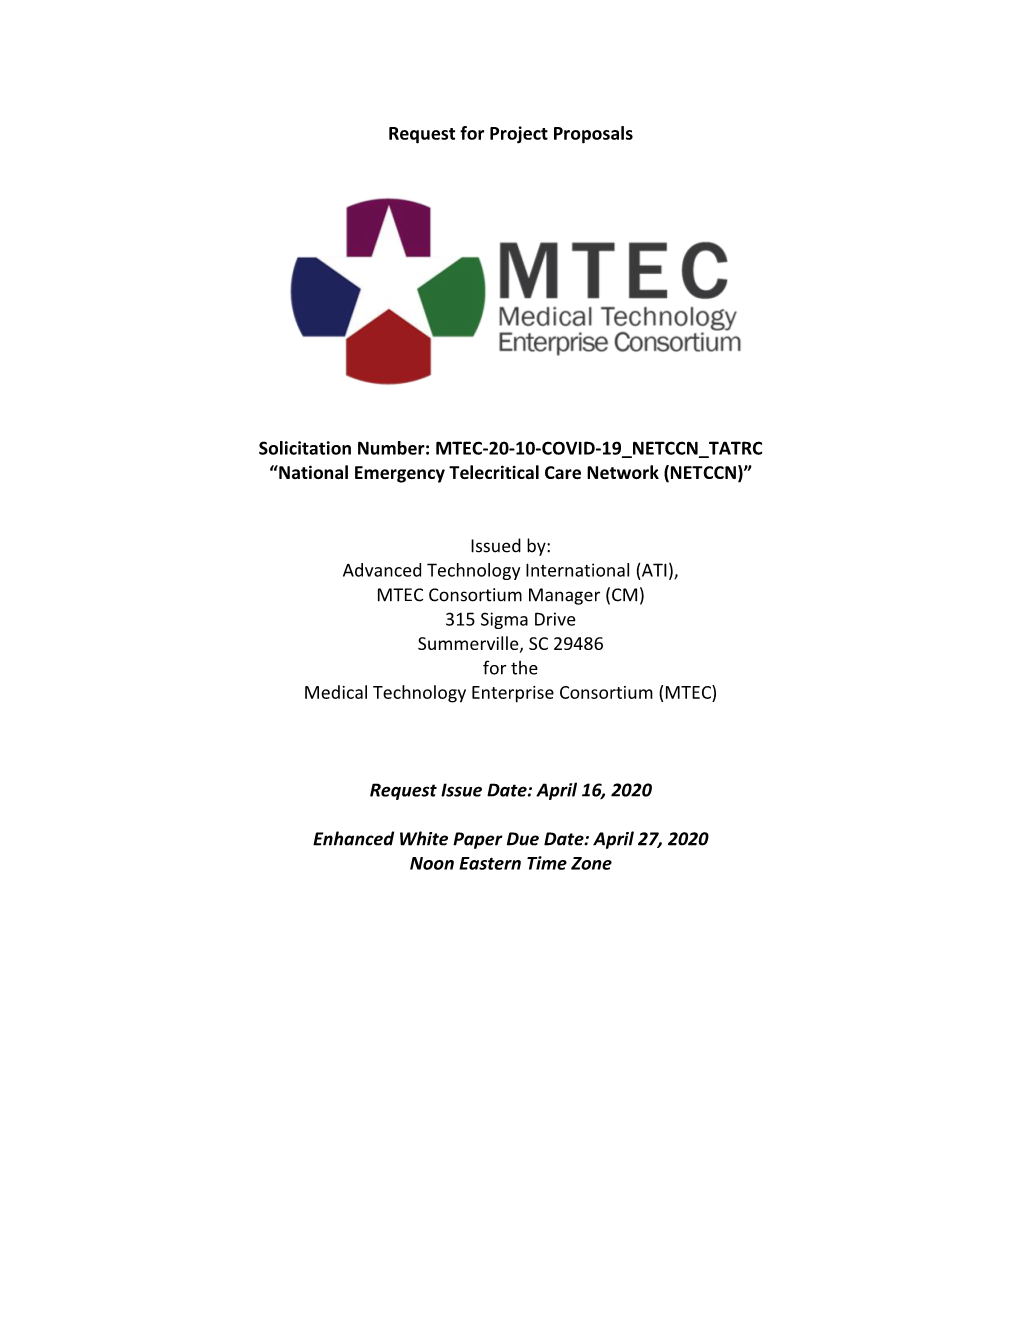 Request for Project Proposals: MTEC-20-10-COVID